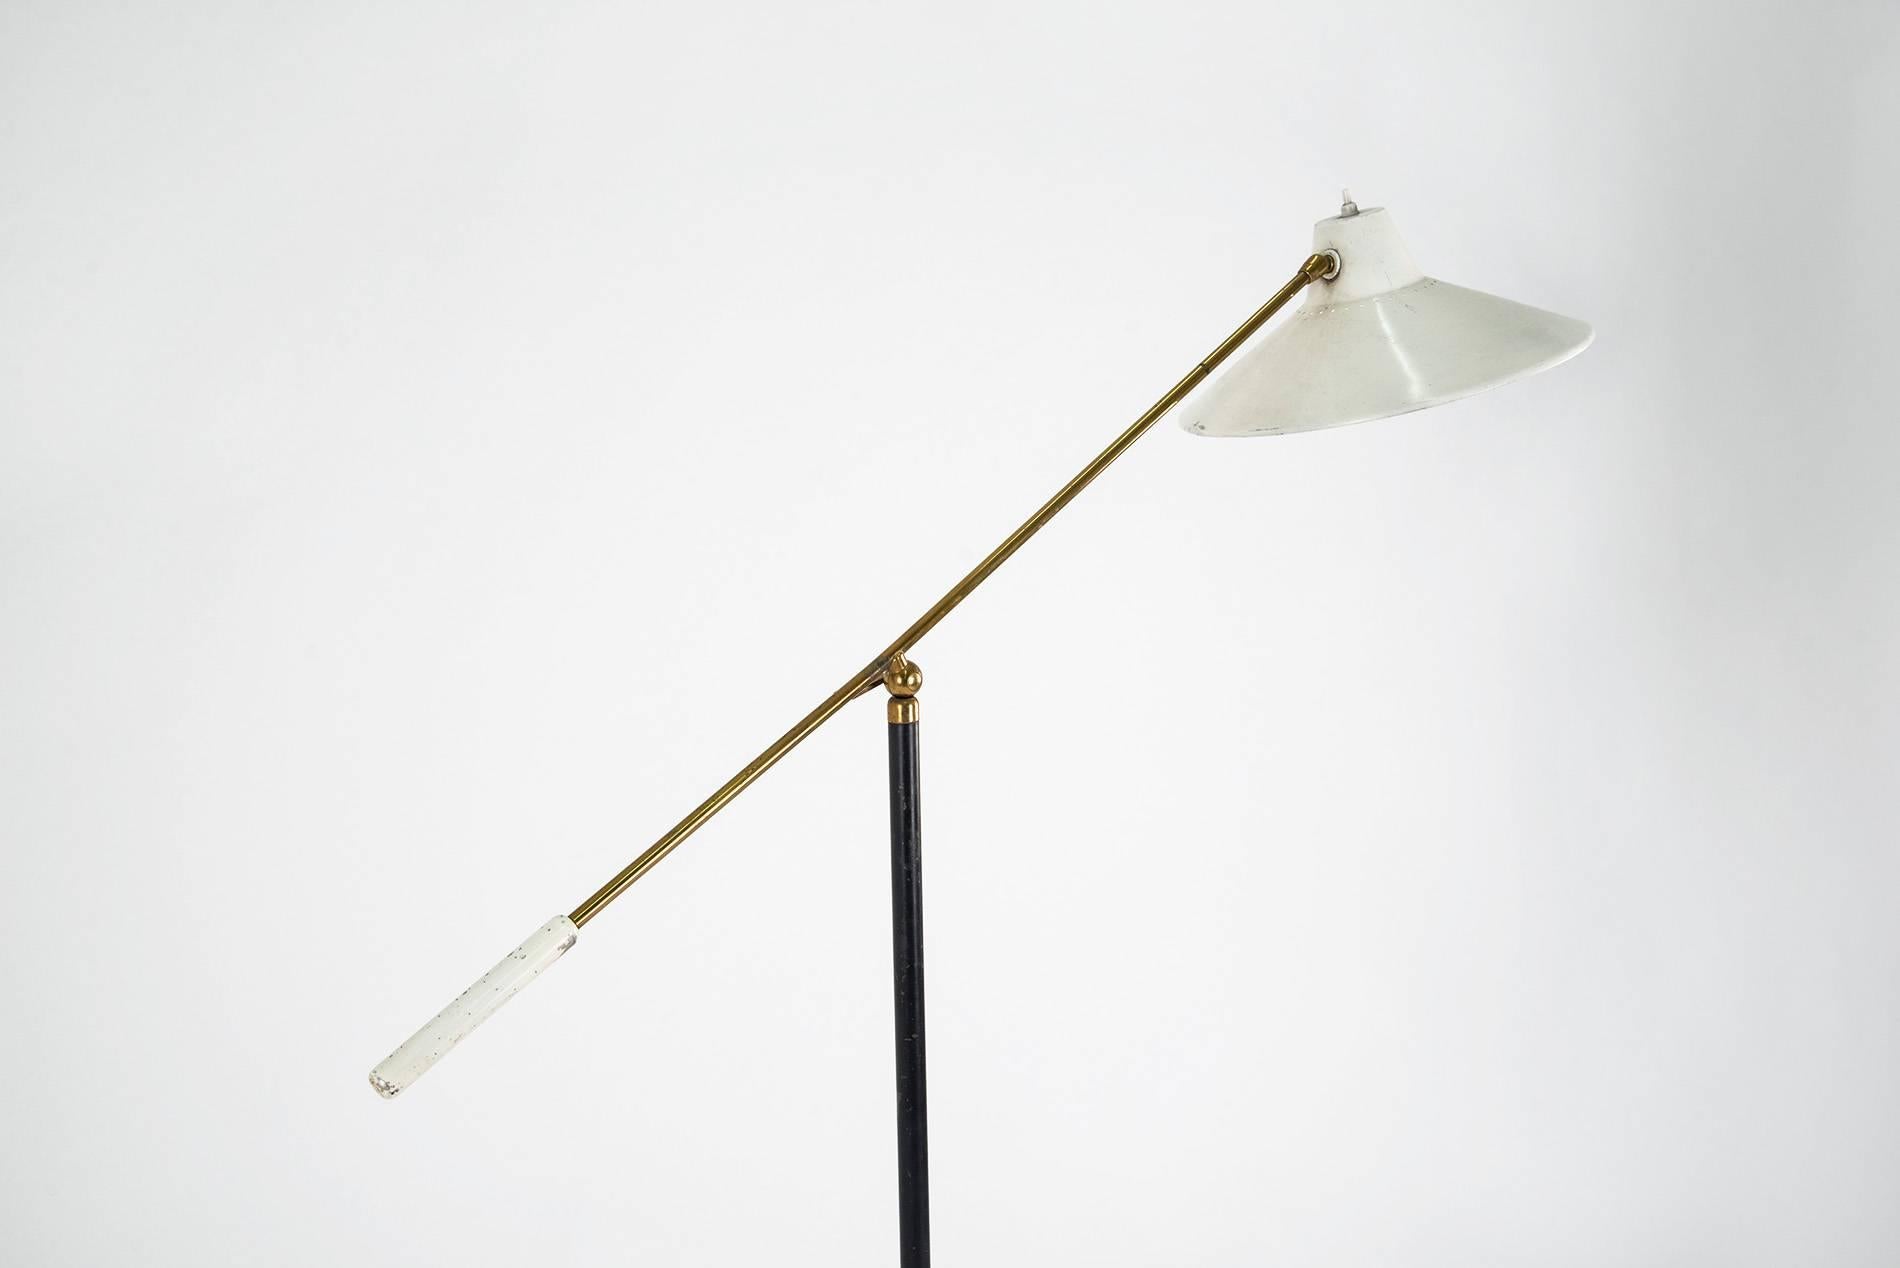 Elegant adjustable floor lamp manufactured by Stilnovo in the, 1950s. White marble base, black lacquered metal stem, brass arm and details, white lacquered metal diffuser. Good original vintage conditions.